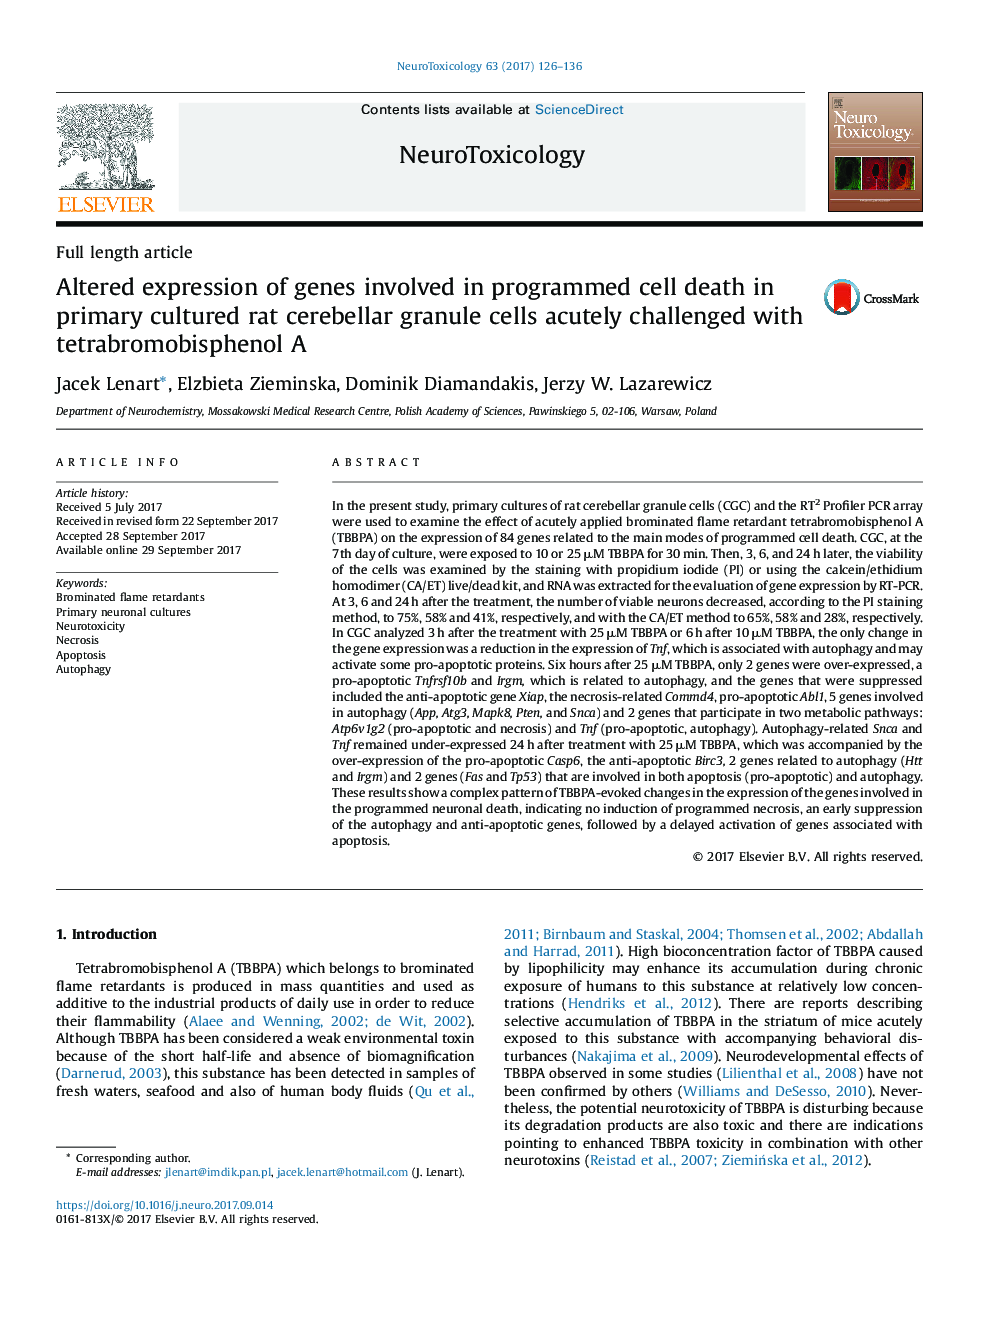 Altered expression of genes involved in programmed cell death in primary cultured rat cerebellar granule cells acutely challenged with tetrabromobisphenol A